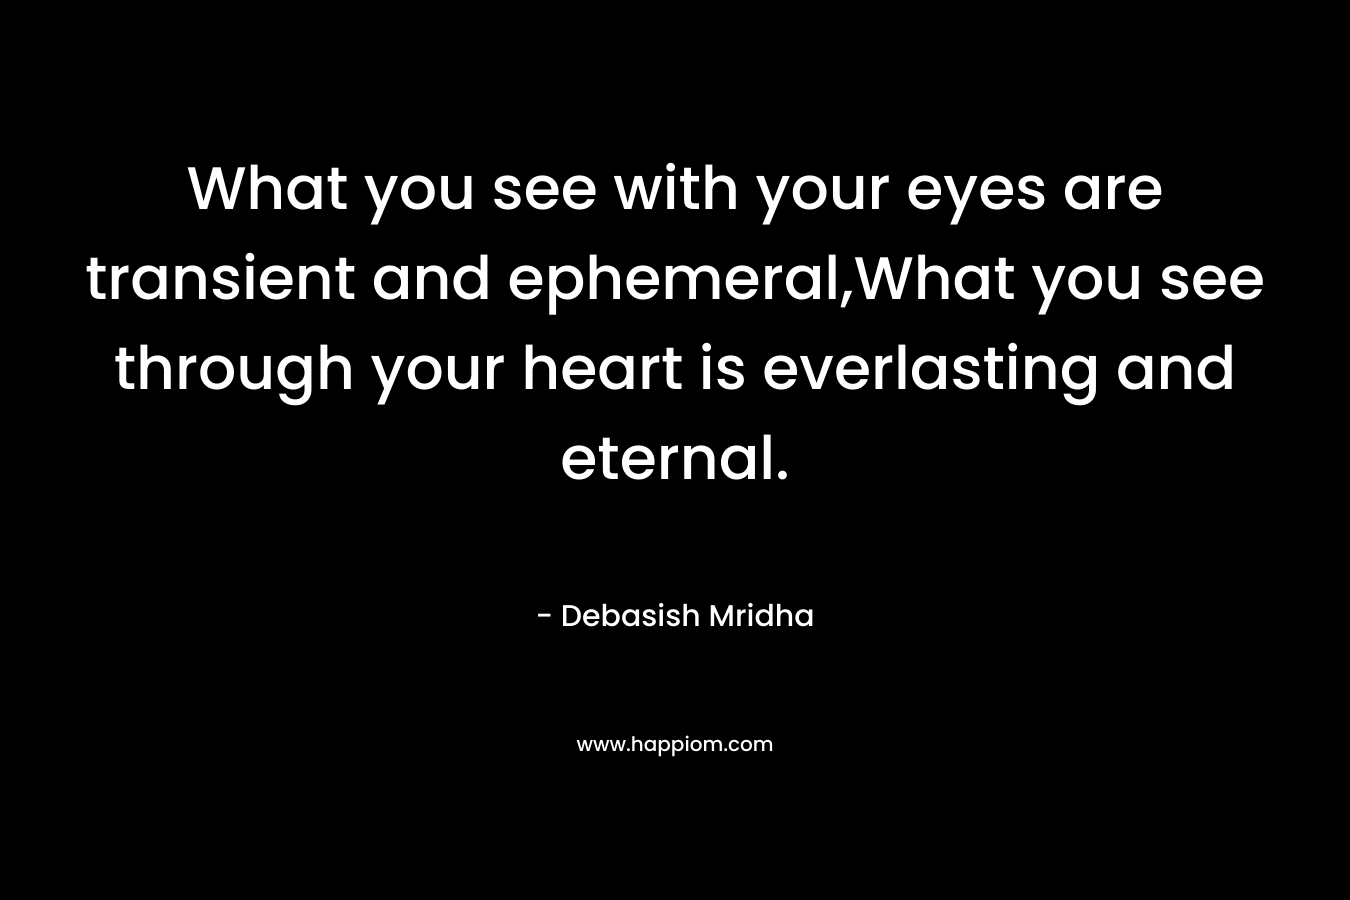 What you see with your eyes are transient and ephemeral,What you see through your heart is everlasting and eternal. – Debasish Mridha